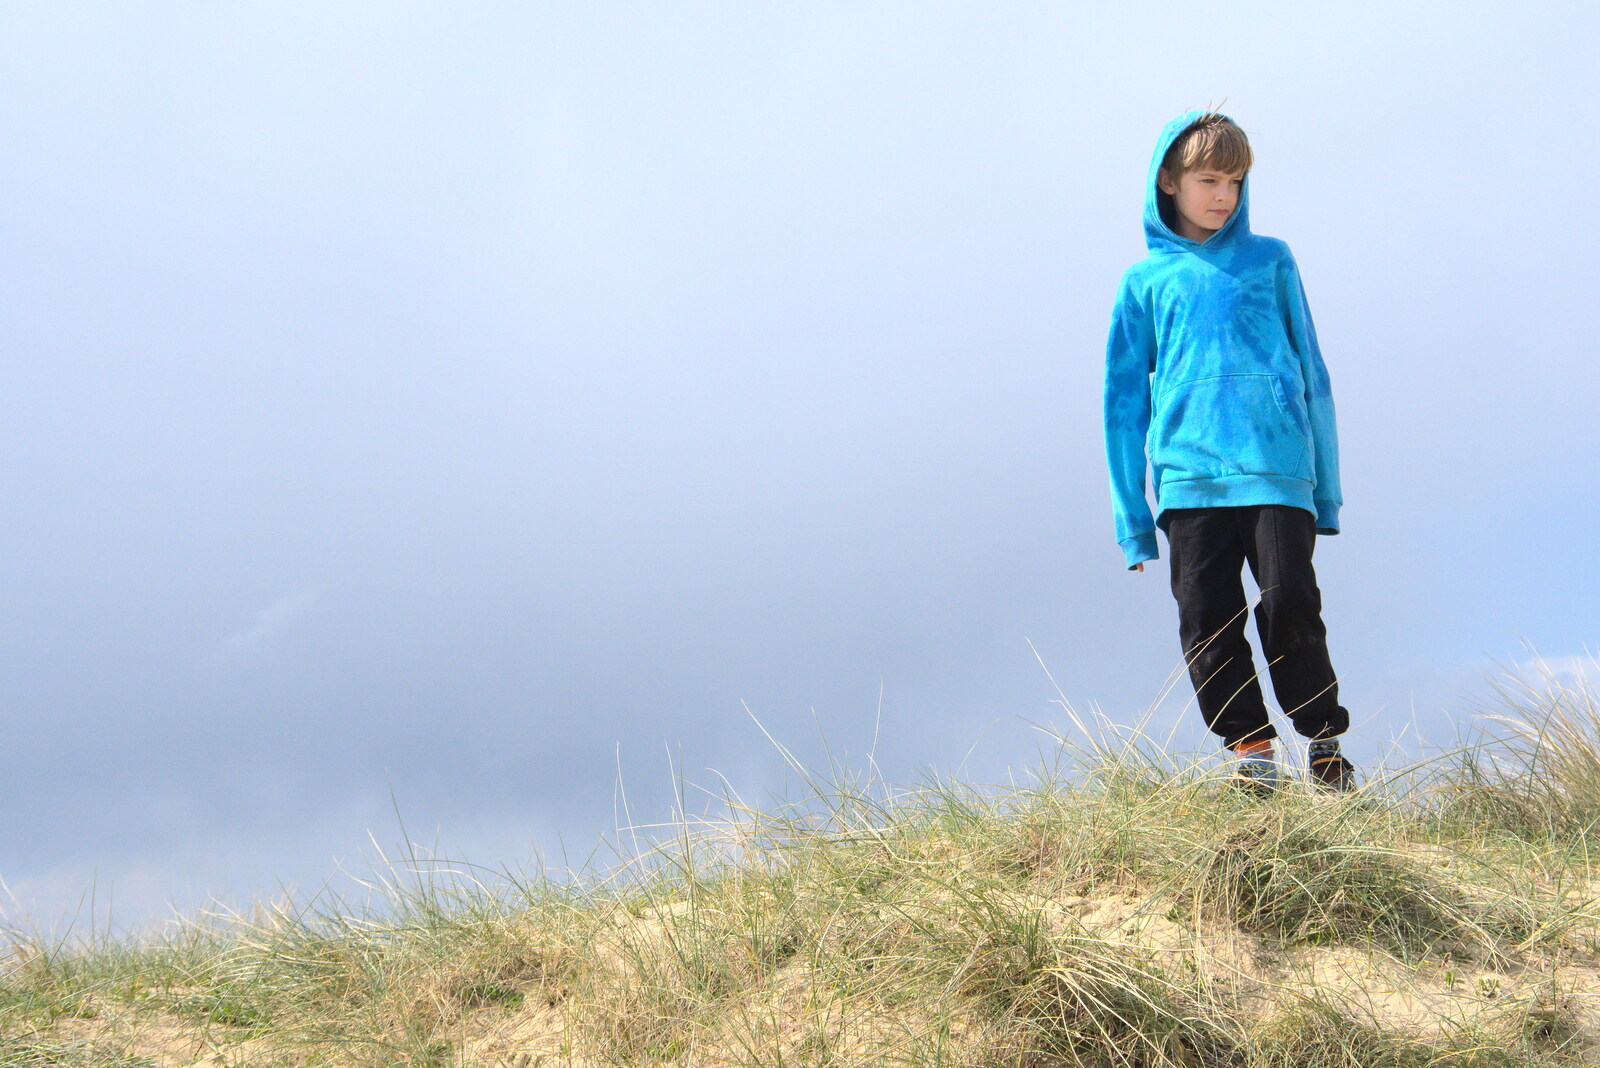 Harry stands on the dunes from A Chilly Trip to the Beach, Southwold Harbour, Suffolk - 2nd May 2021